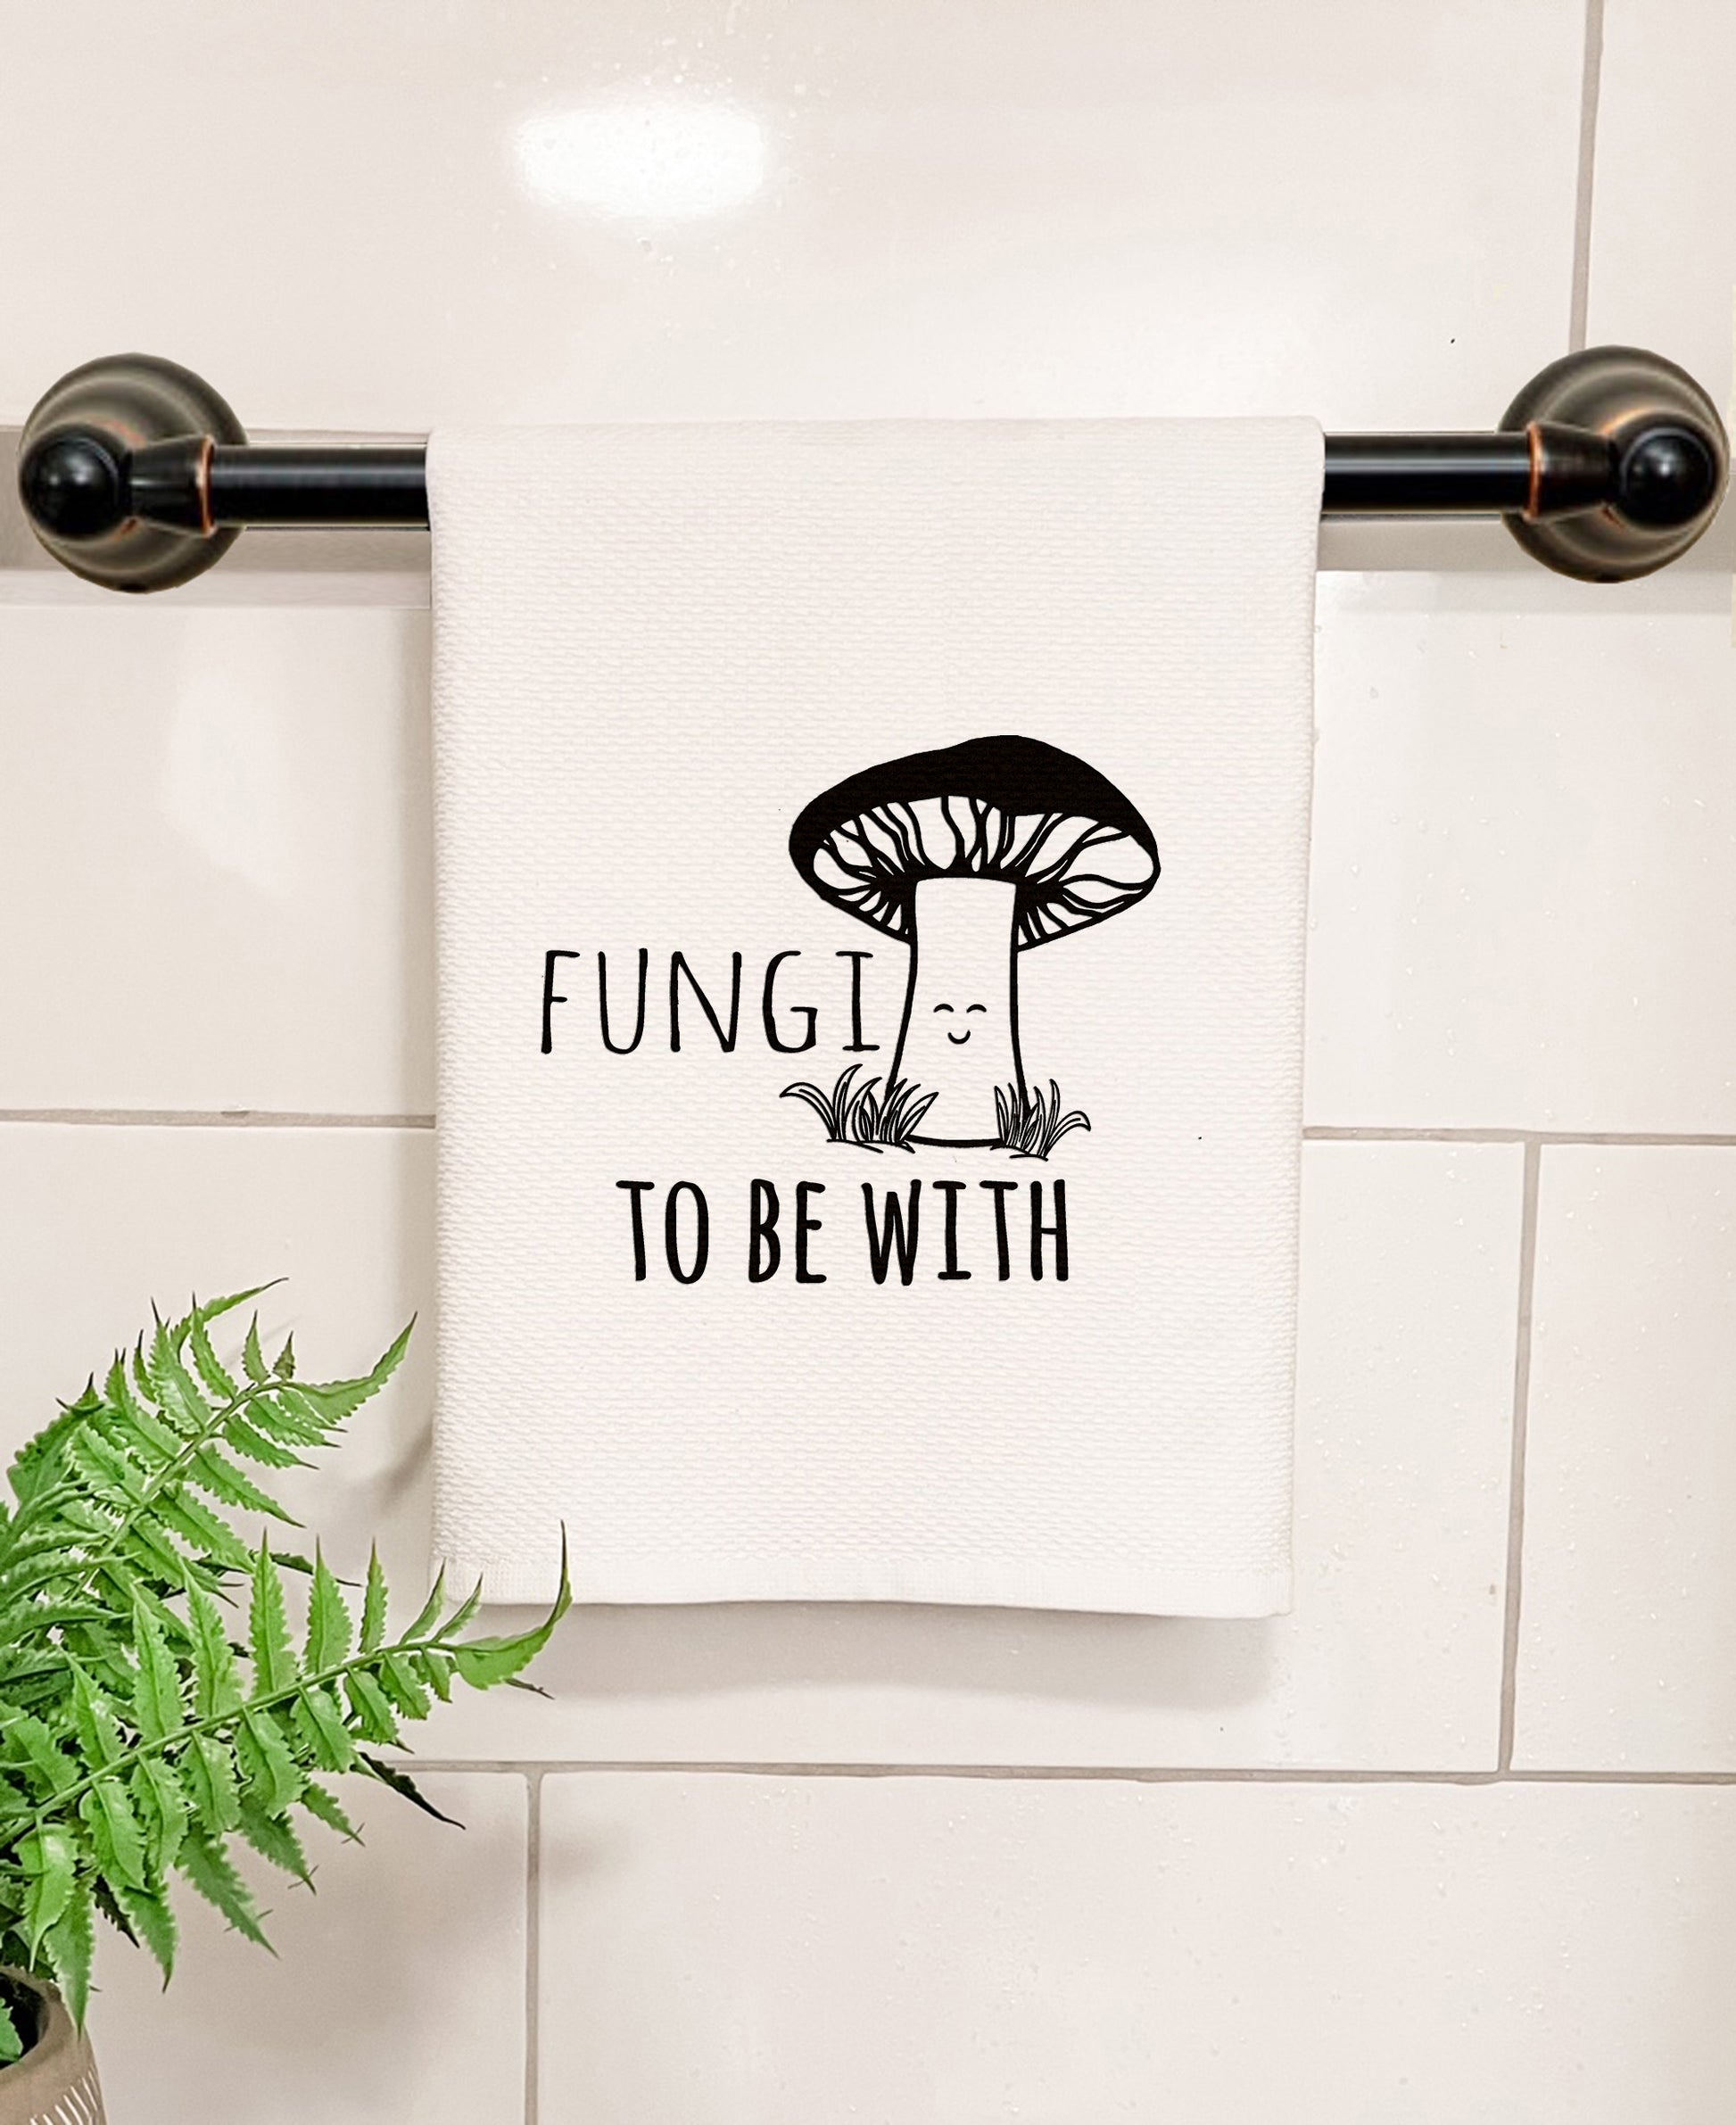 Fungi To Be With - Kitchen/Bathroom Hand Towel (Waffle Weave) - MoonlightMakers